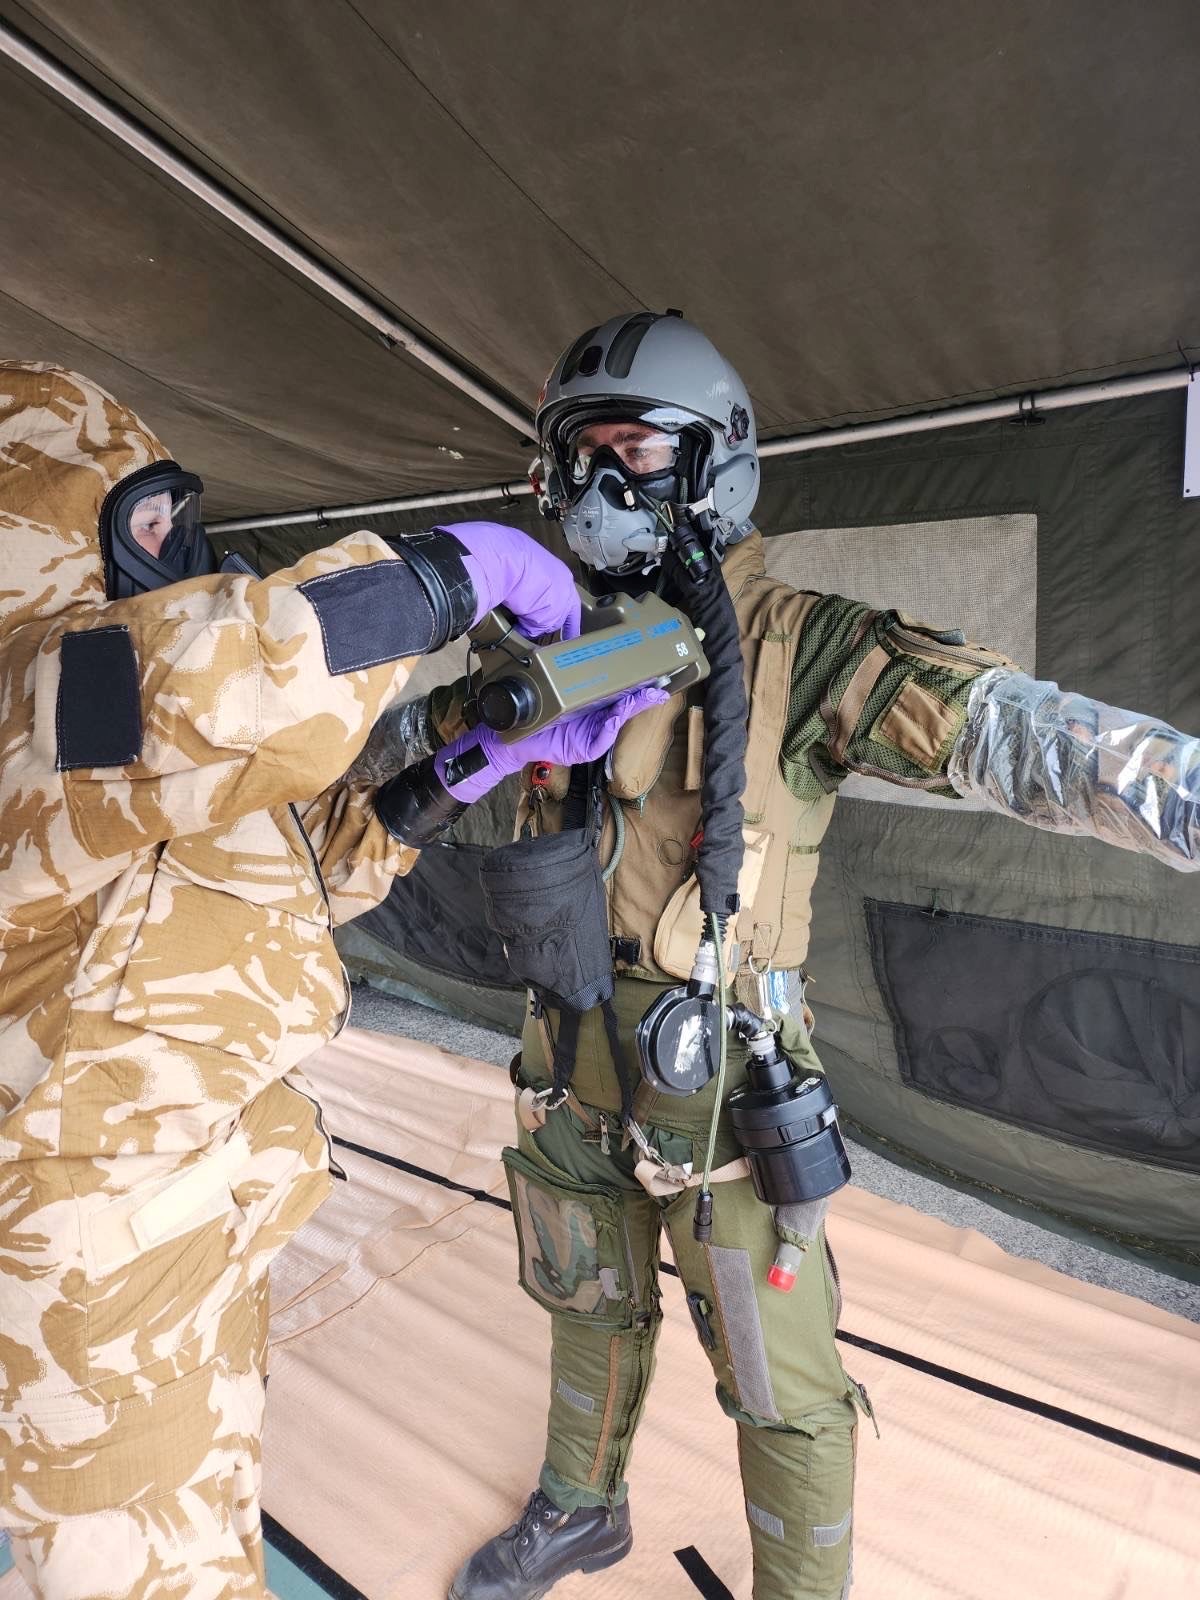 Personnel in full CBRN protective kit, scanning a pilot for CBRN particulates